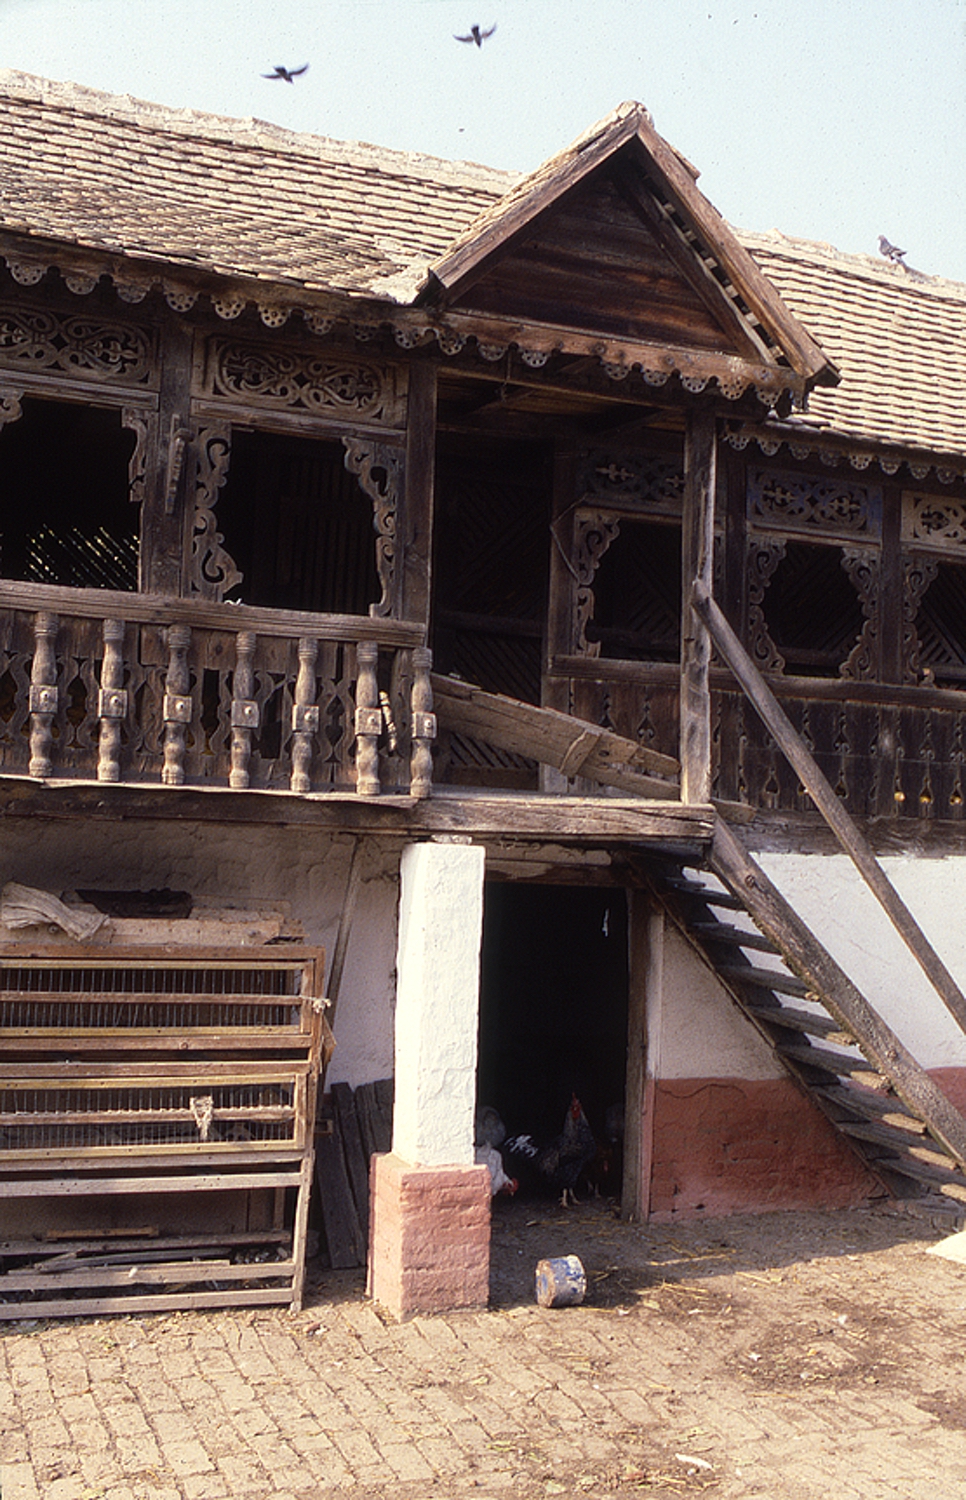 <p>The wooden rail at the stair landing is now missing but the notched corner post indicates where the railing cap once existed. On the right, more solid wooden railing panels occur and the openings above reveal the koš lattice work set back from the surface. The extended cross gable that covers the landing serves as a boundary for the gently sloping tile roof over the gallery.</p>